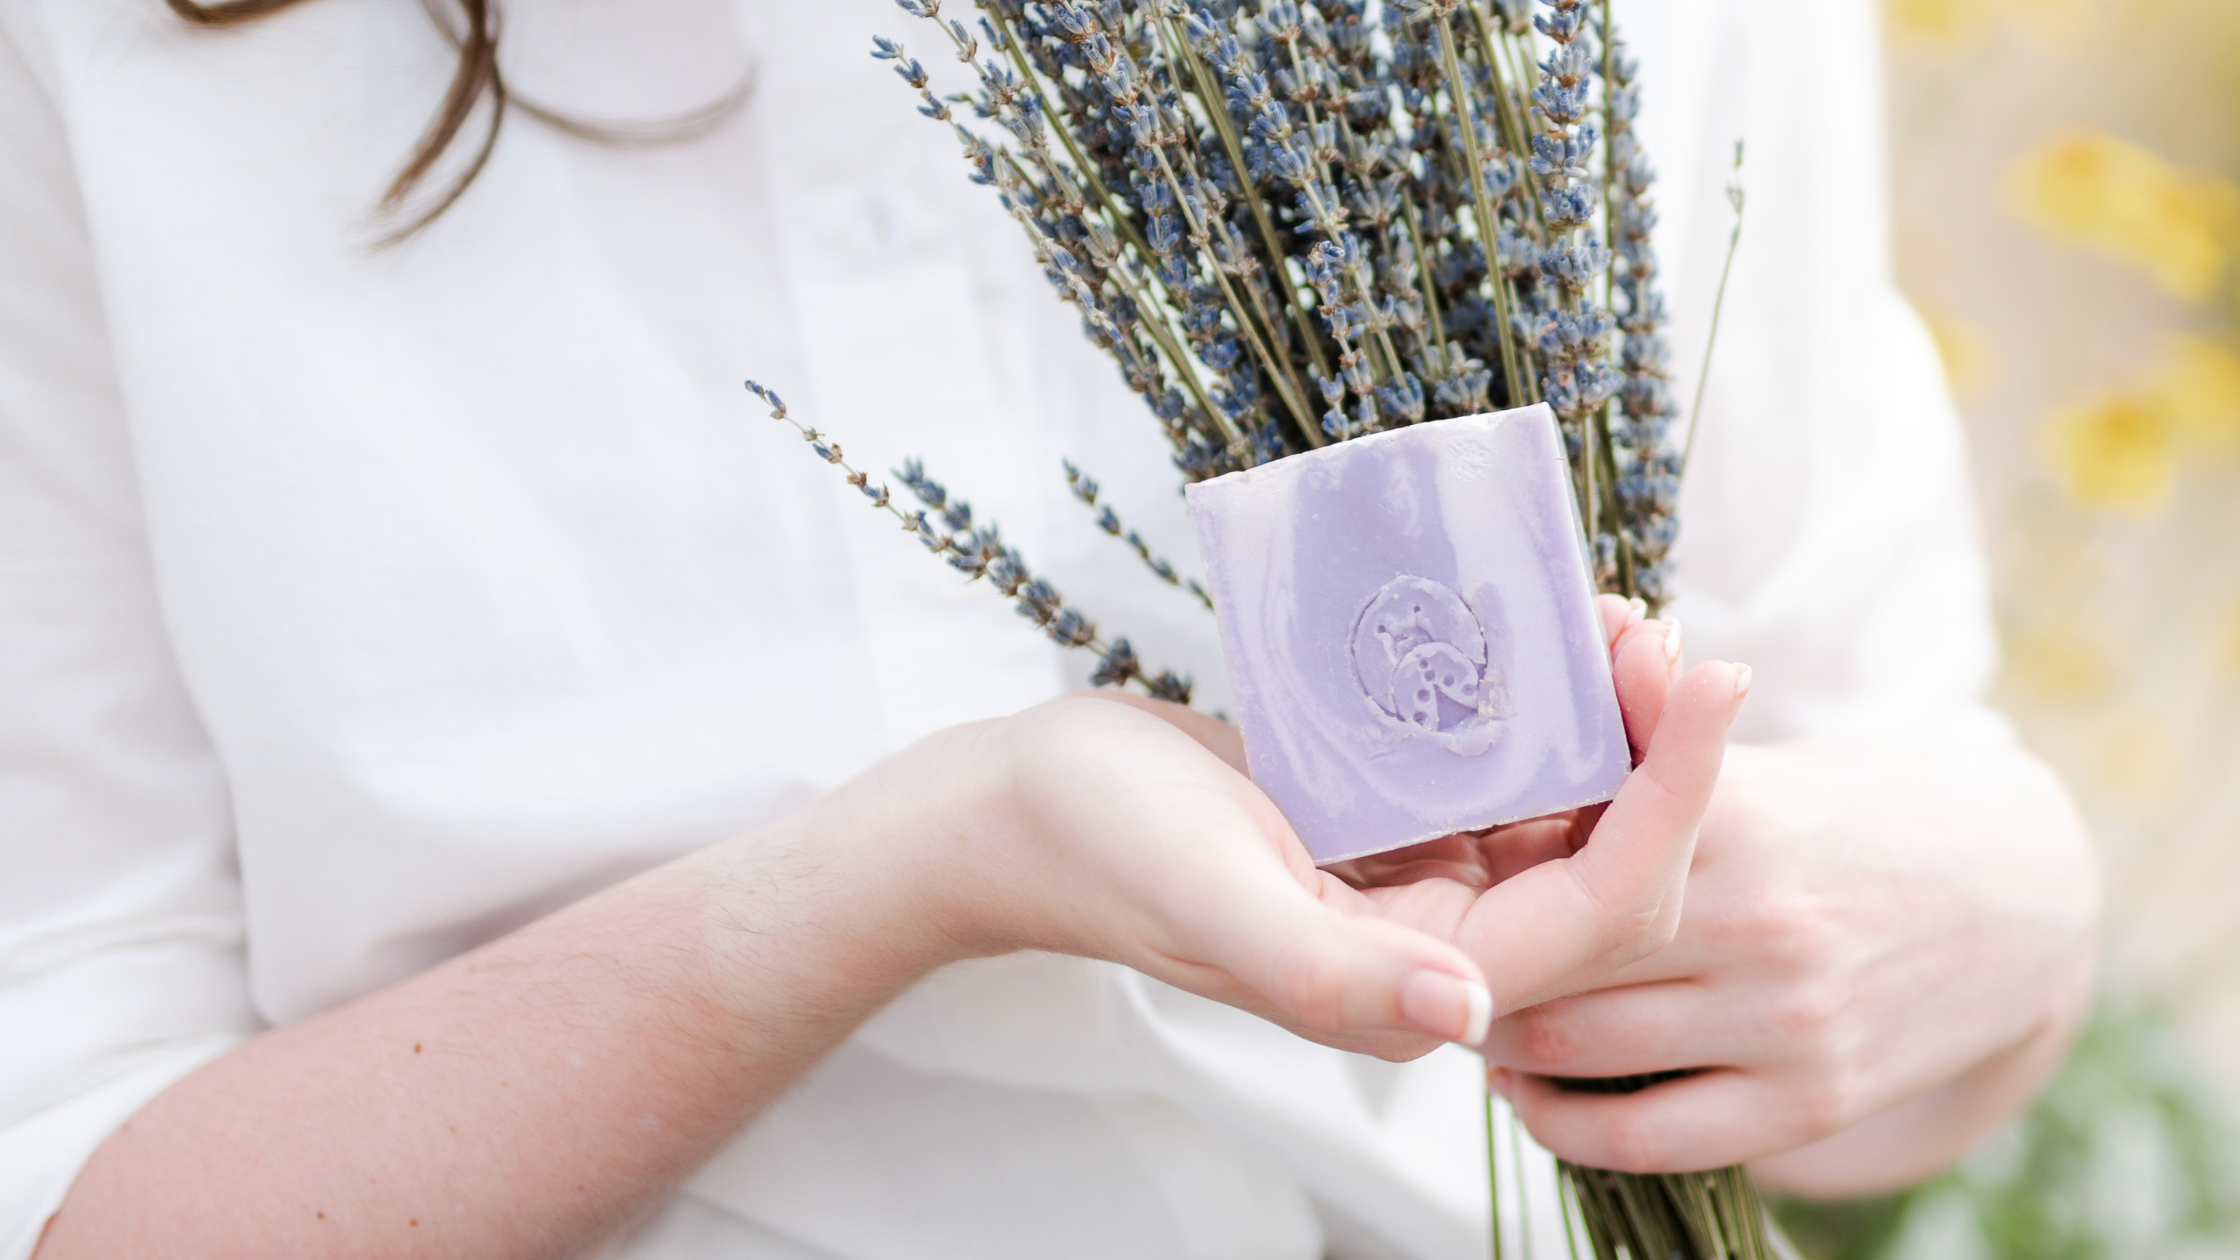 LadyBird's American Lavender Soap is the all natural eco-conscious choice to elevate your bath time routine